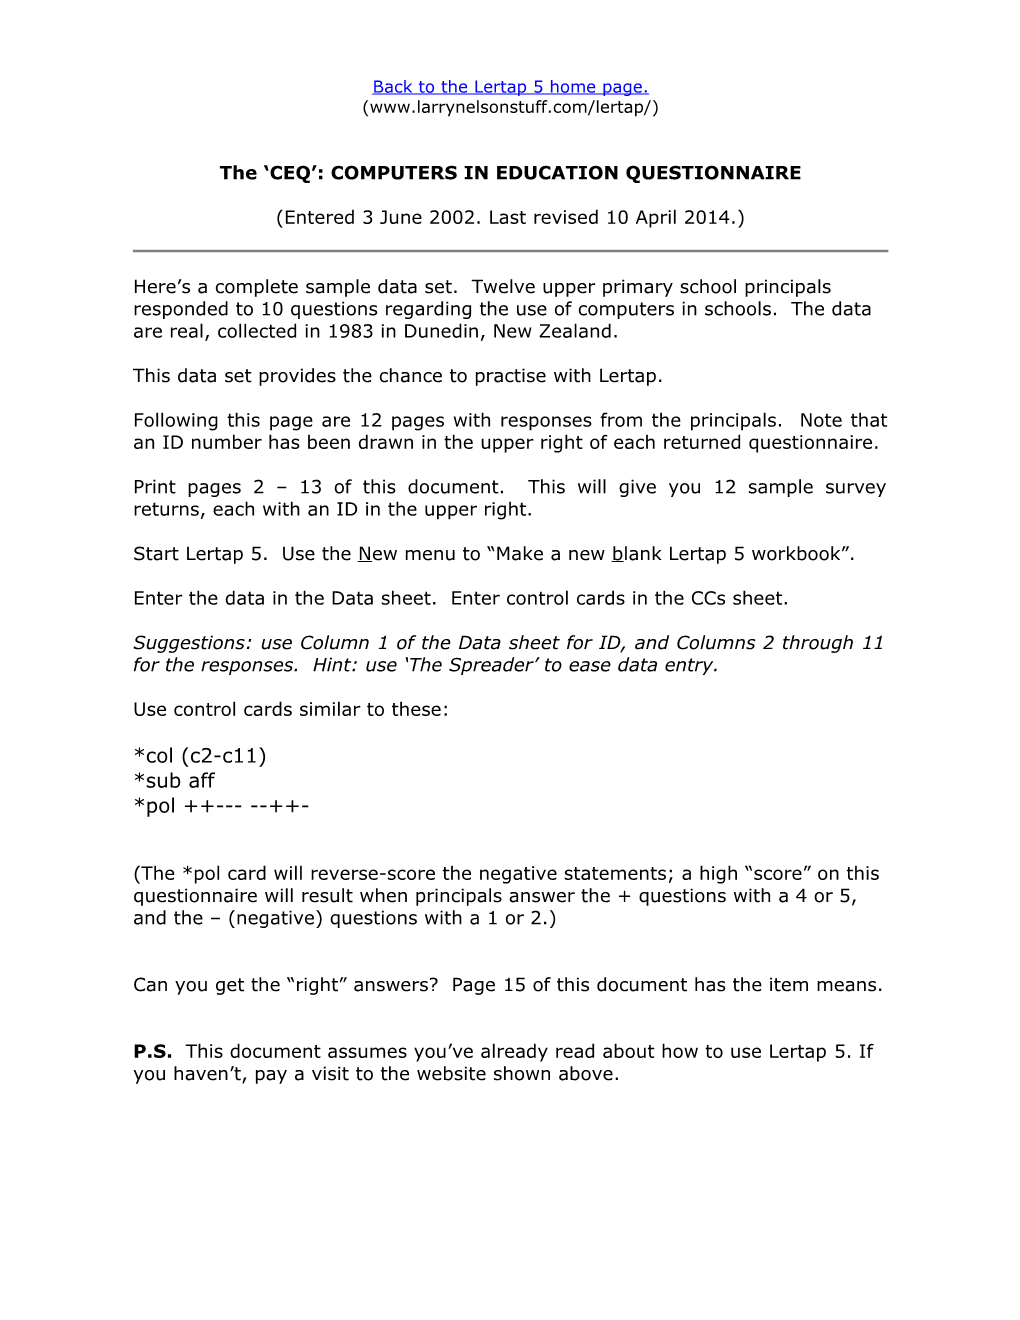 The CEQ : COMPUTERS in EDUCATION QUESTIONNAIRE